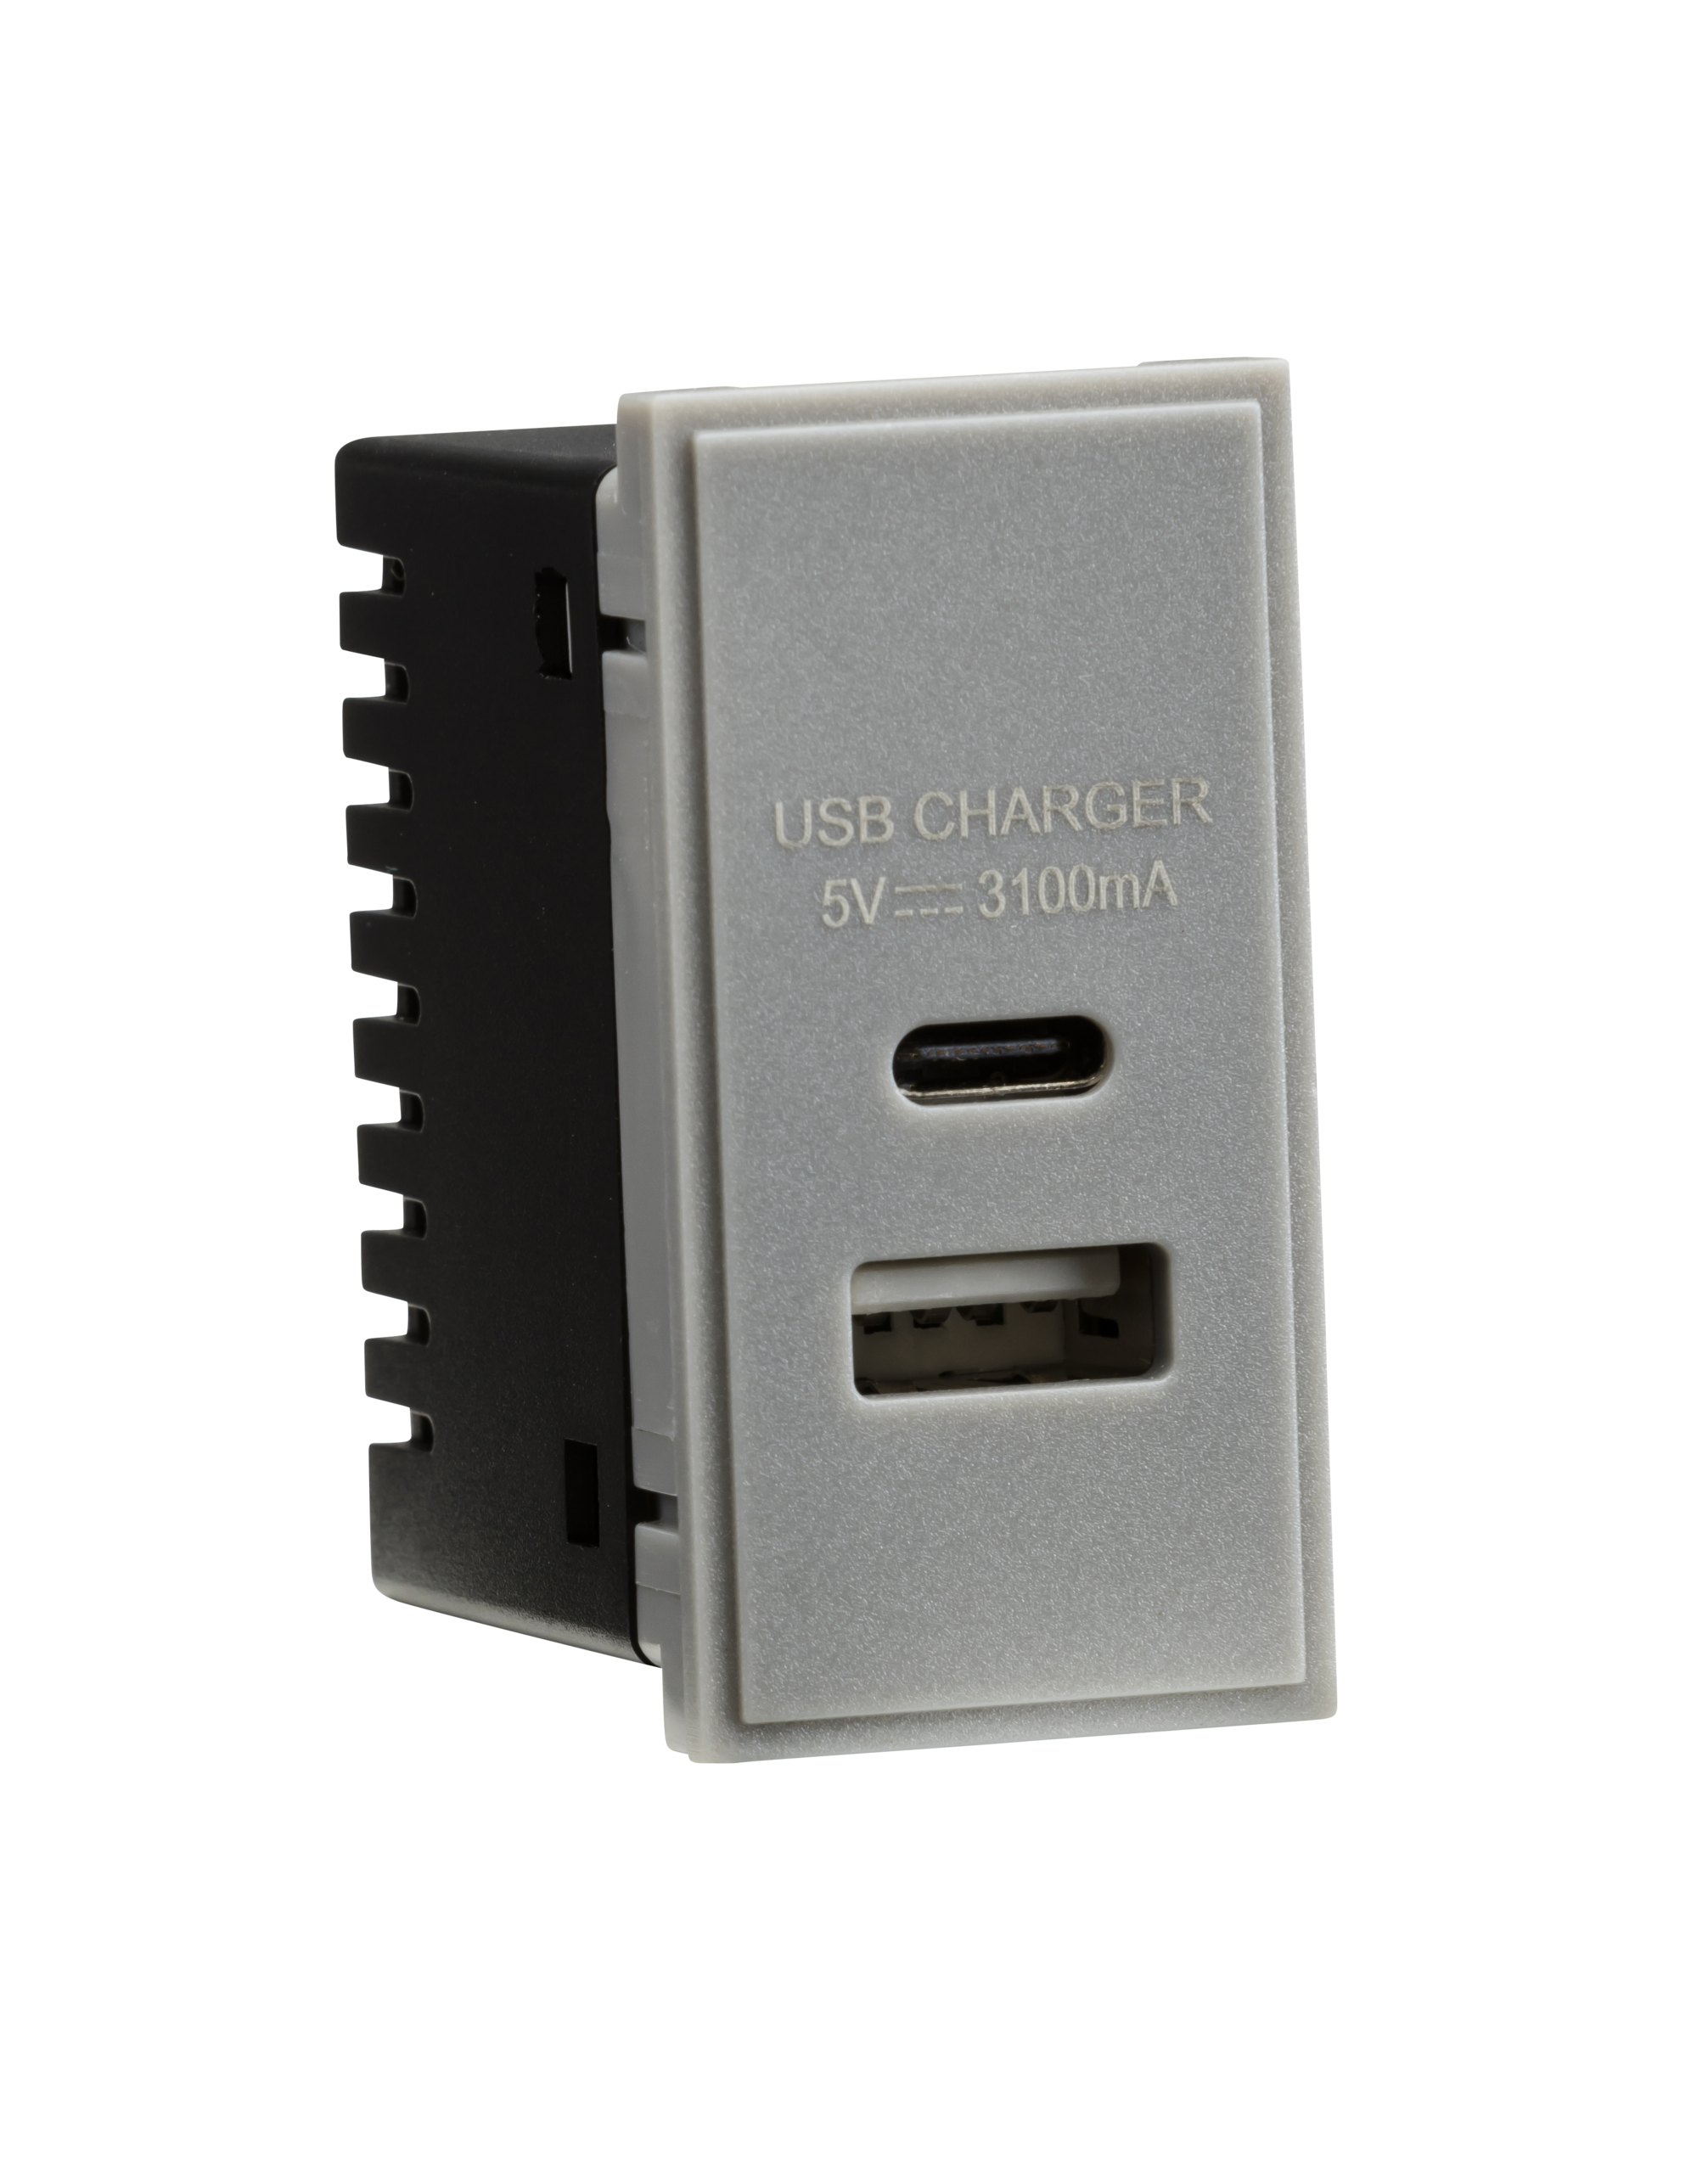 ML Accessories-NETUSBCGY Dual USB Charger (3.1A) Module 25 x 50mm - Grey